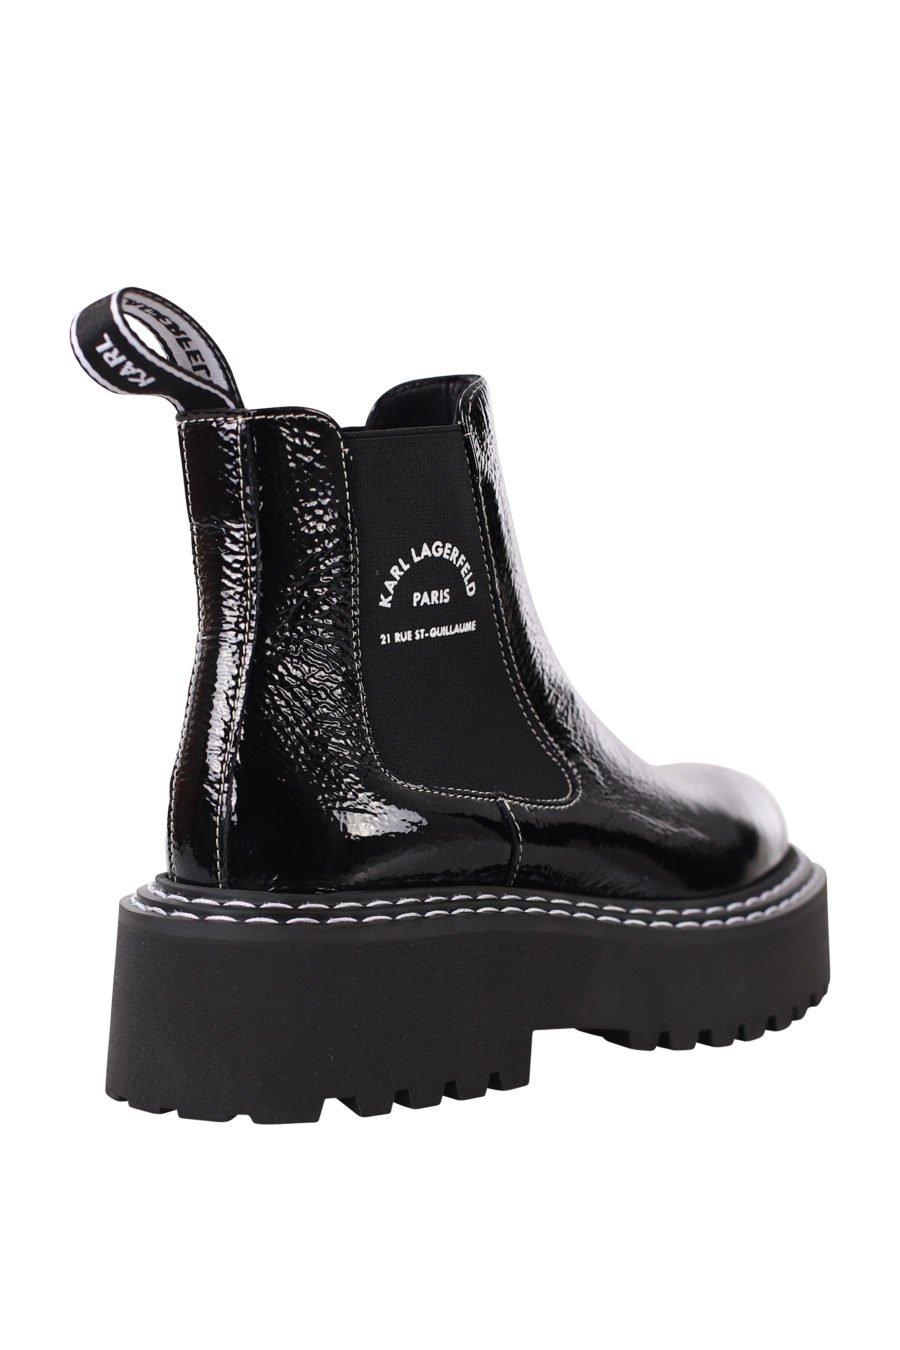 Black ankle boots with platform and small logo - IMG 0431